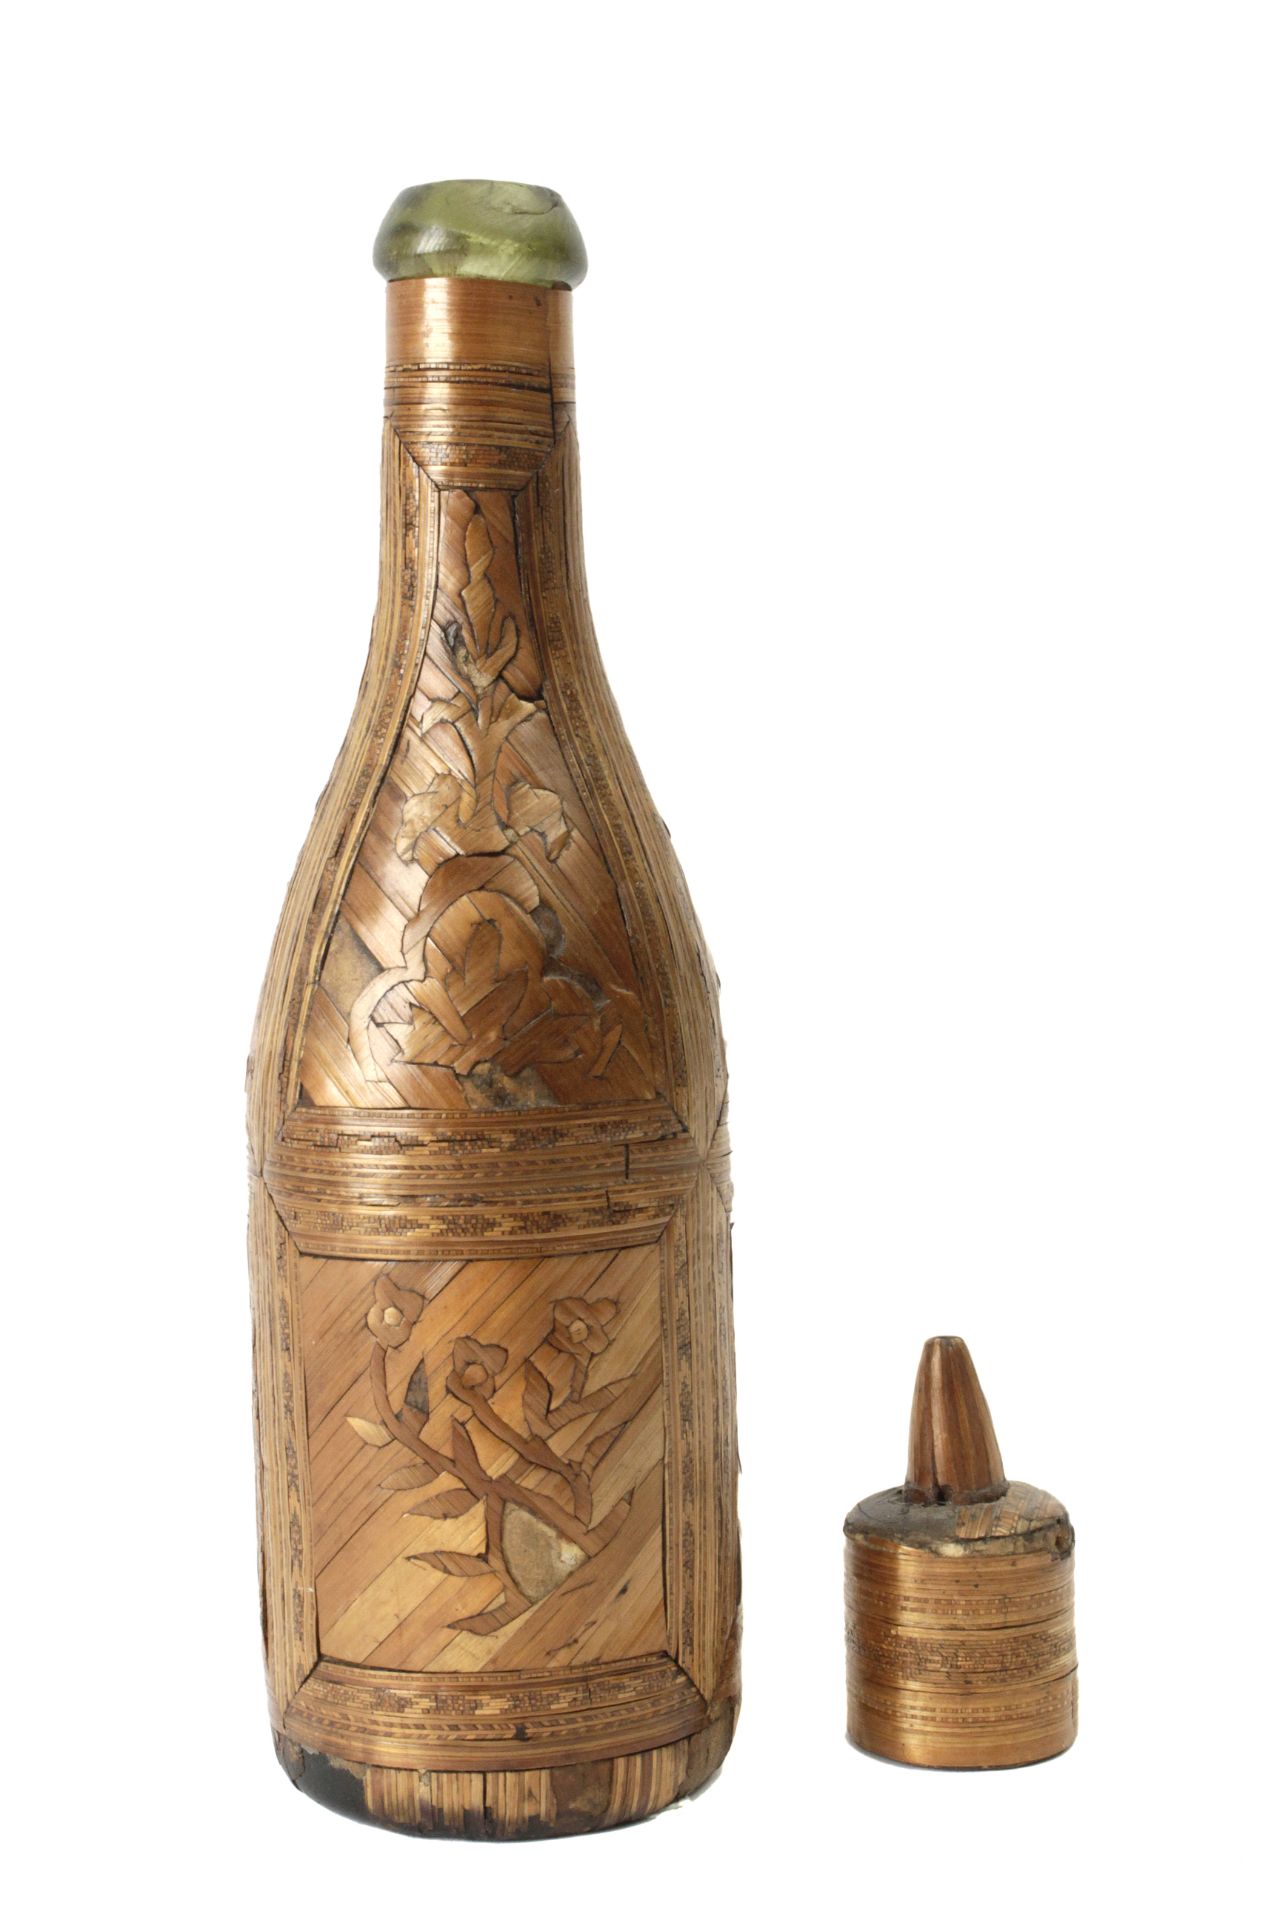 A19th century French bottle in straw marquetry - Image 3 of 4